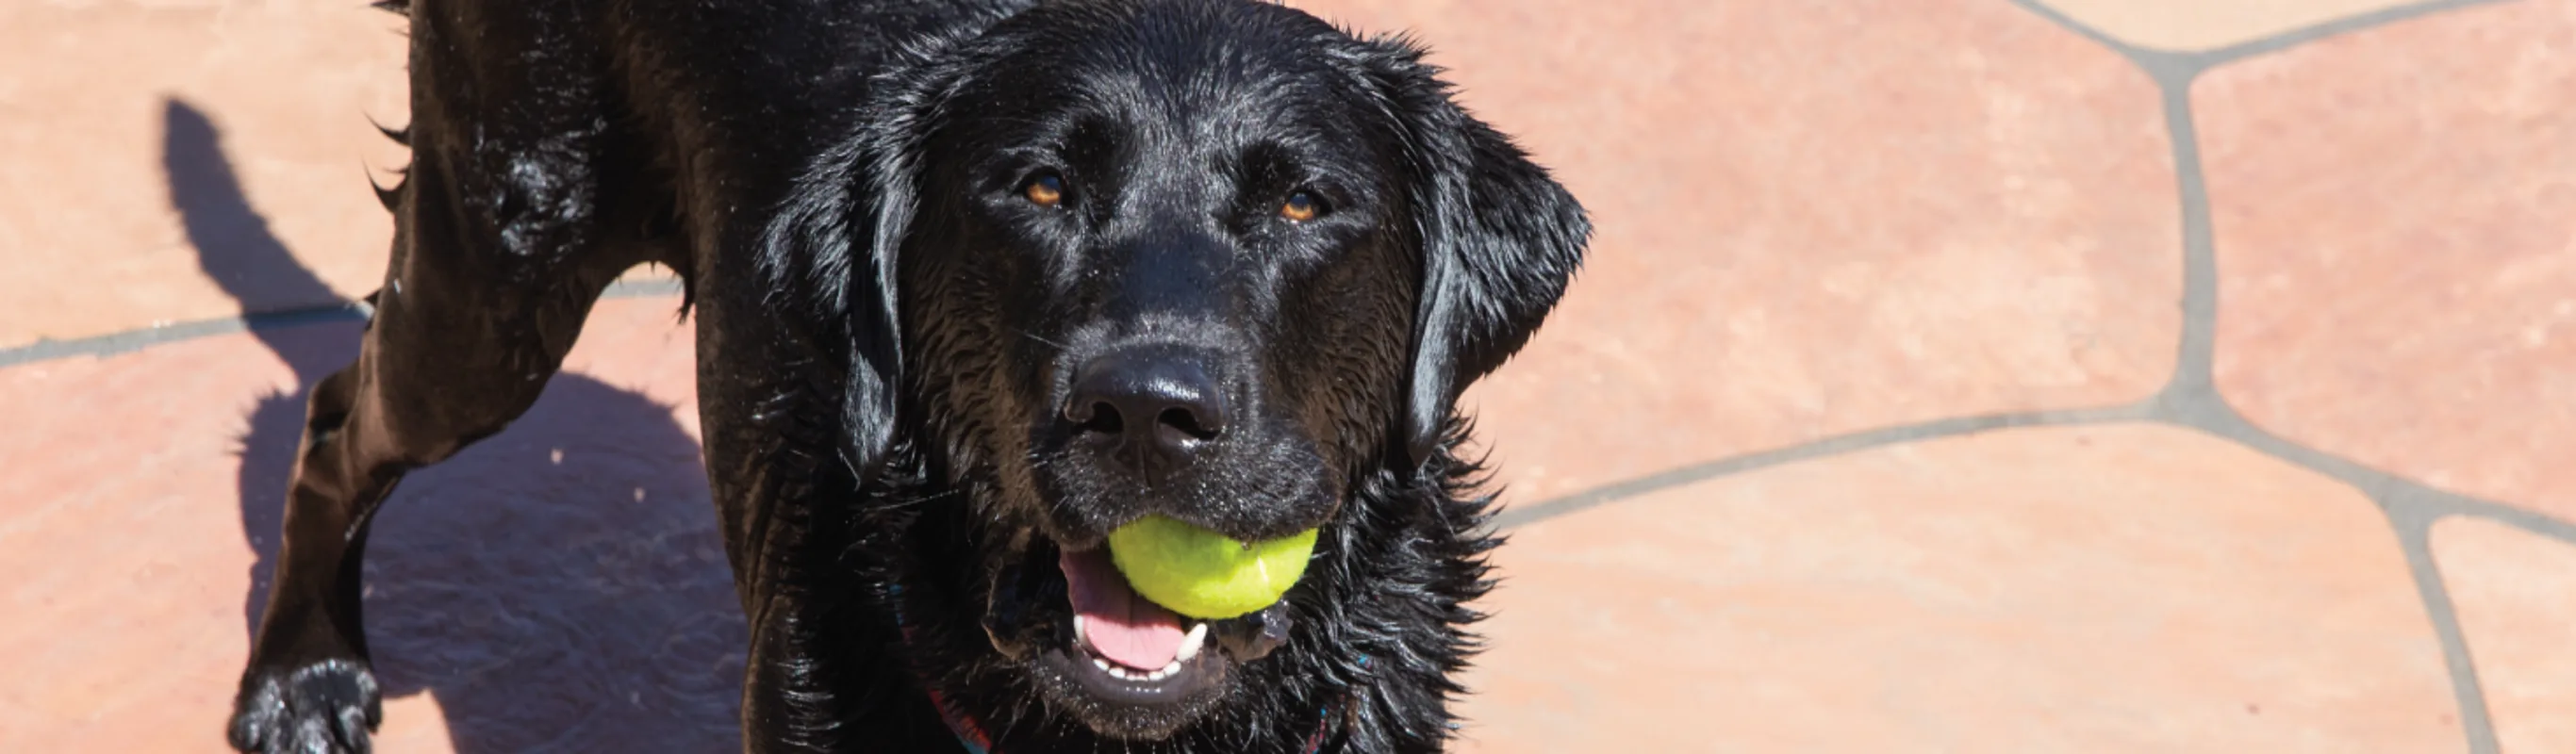 Dog with tennis ball in mouth by pool